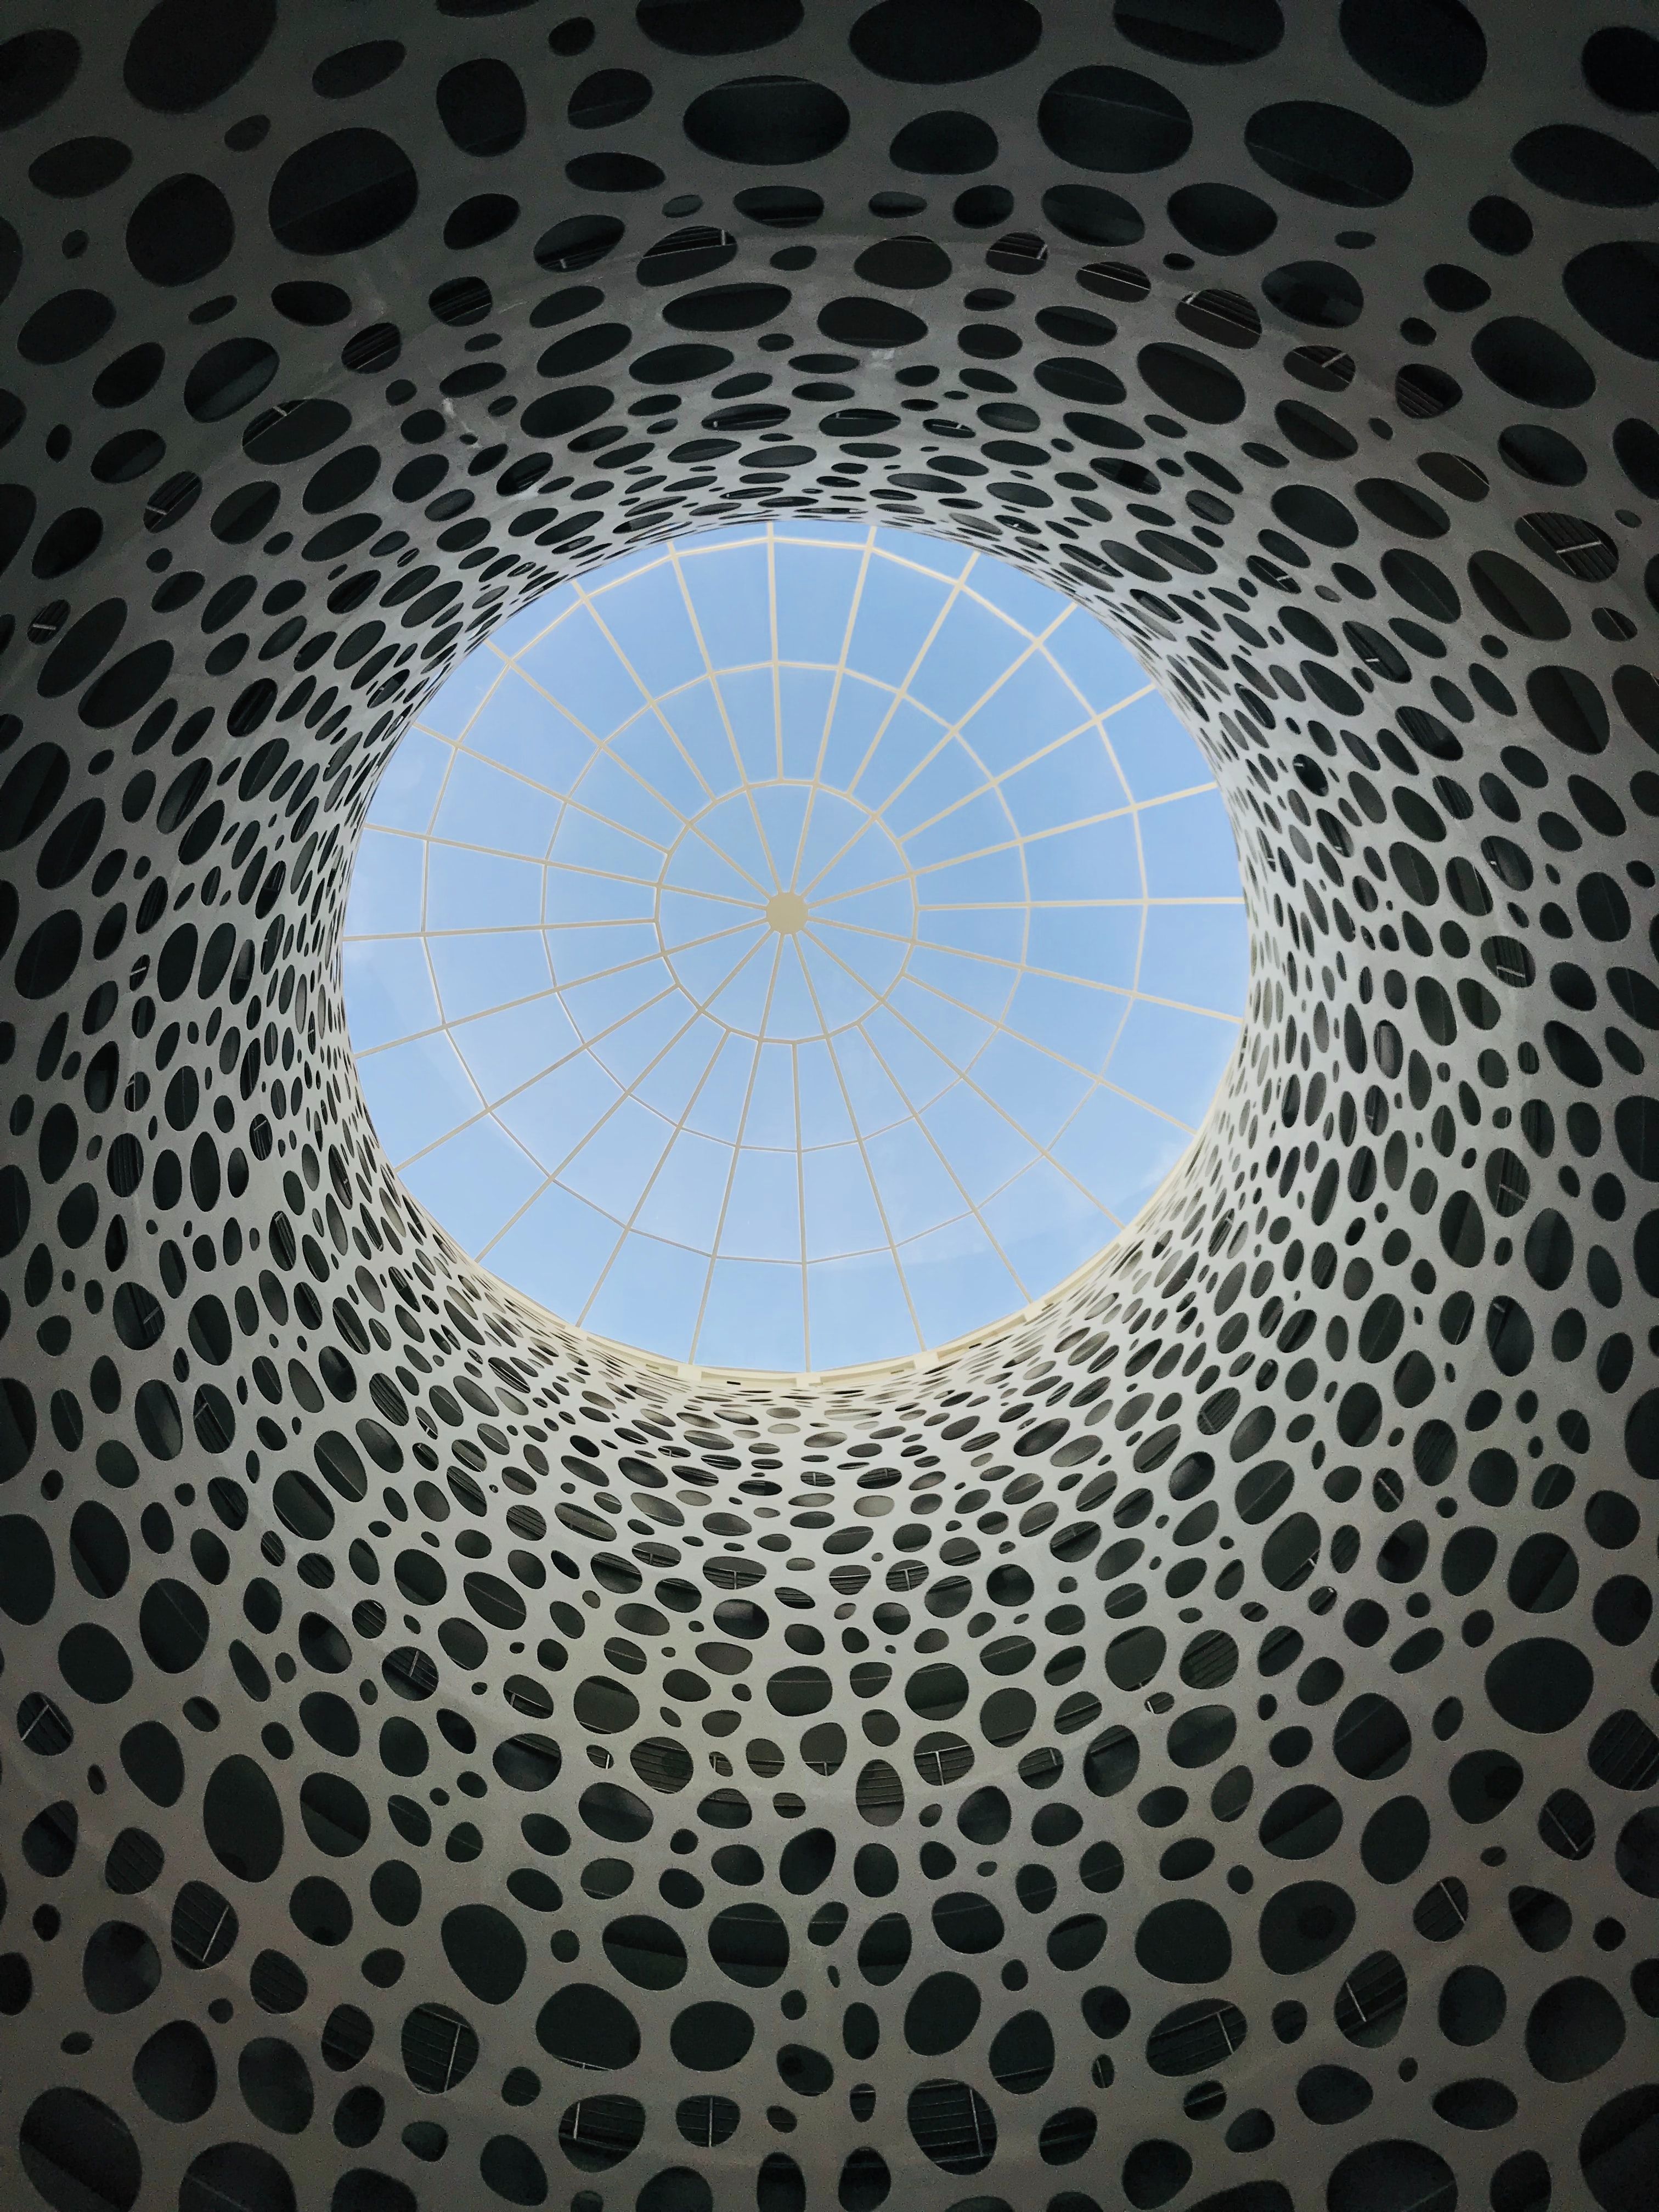 Contemporary architecture in Qatar with a glass skylight surrounded by artistic patterned walls.